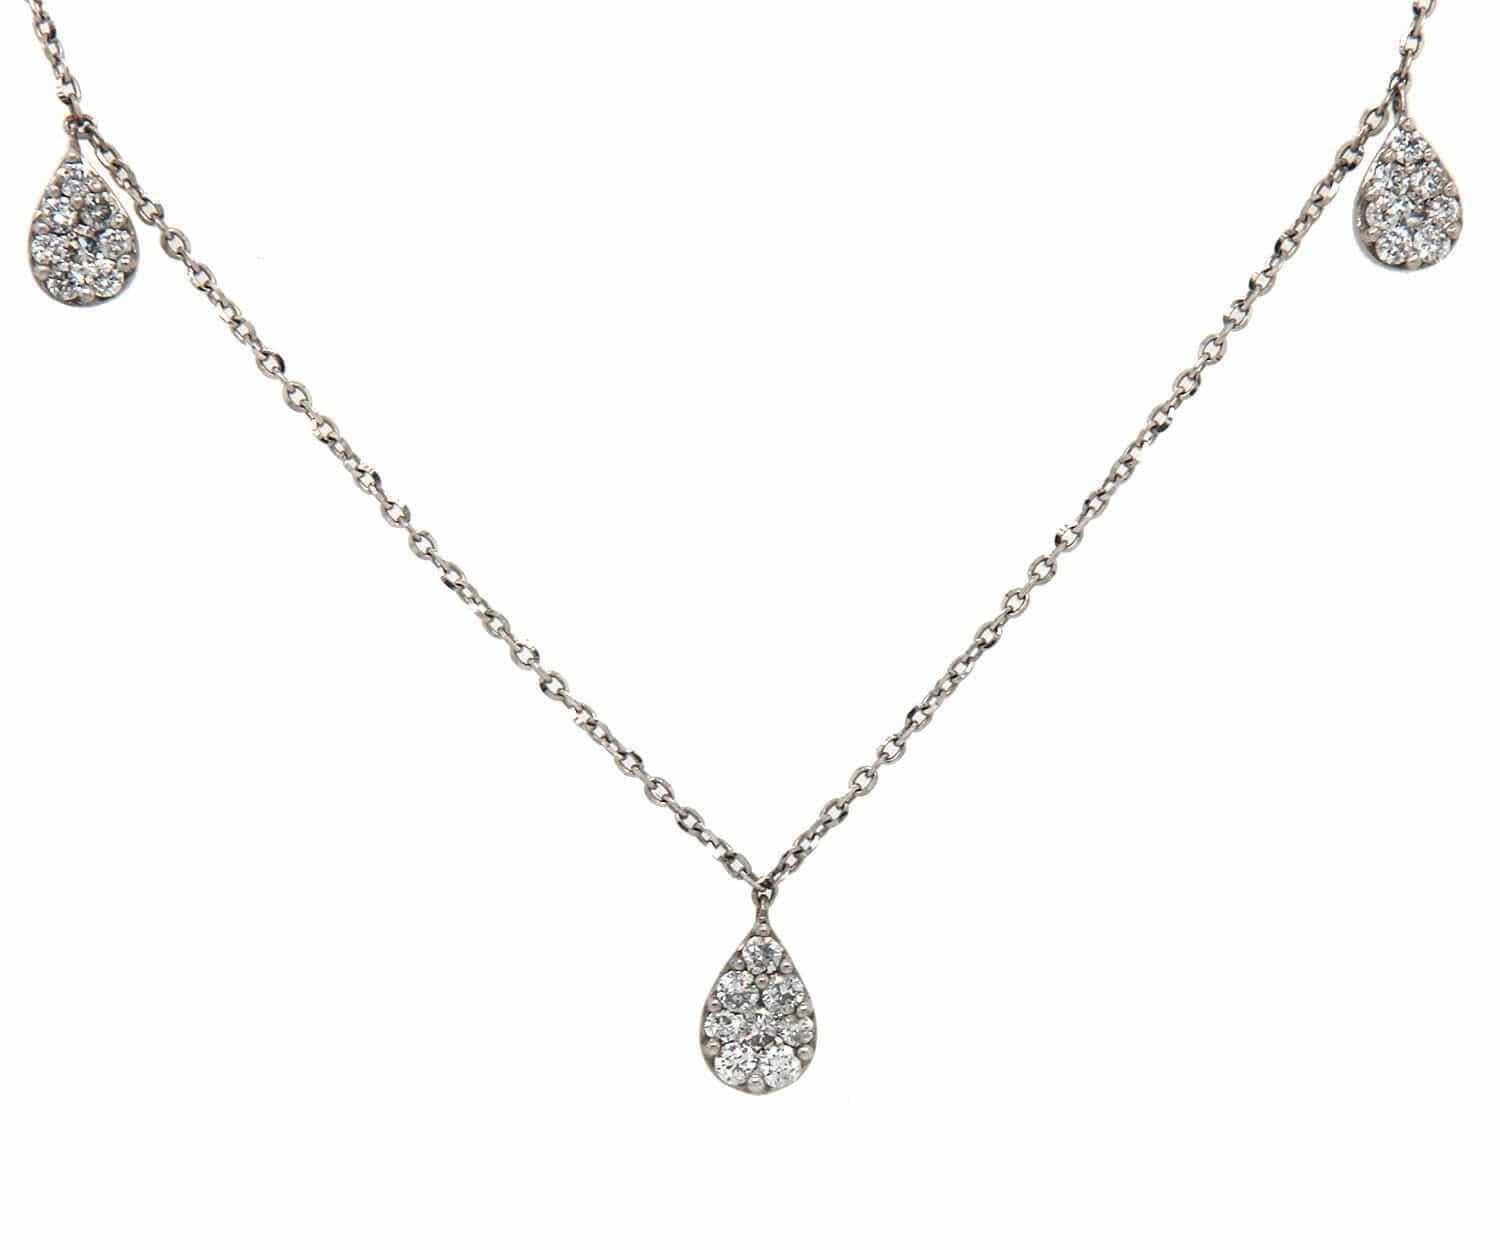 0.48ctw Diamond Station Drop Necklace in 14K

Diamond Station Drop Necklace
14K White Gold
Diamonds Carat Weight: Approx. 0.48ctw
Necklace Length: Approx. 18.0 Inches (Adjustable to 17.0 and 16.0 Inches)
Weight: Approx. 2.30 Grams
Stamped: AU585,